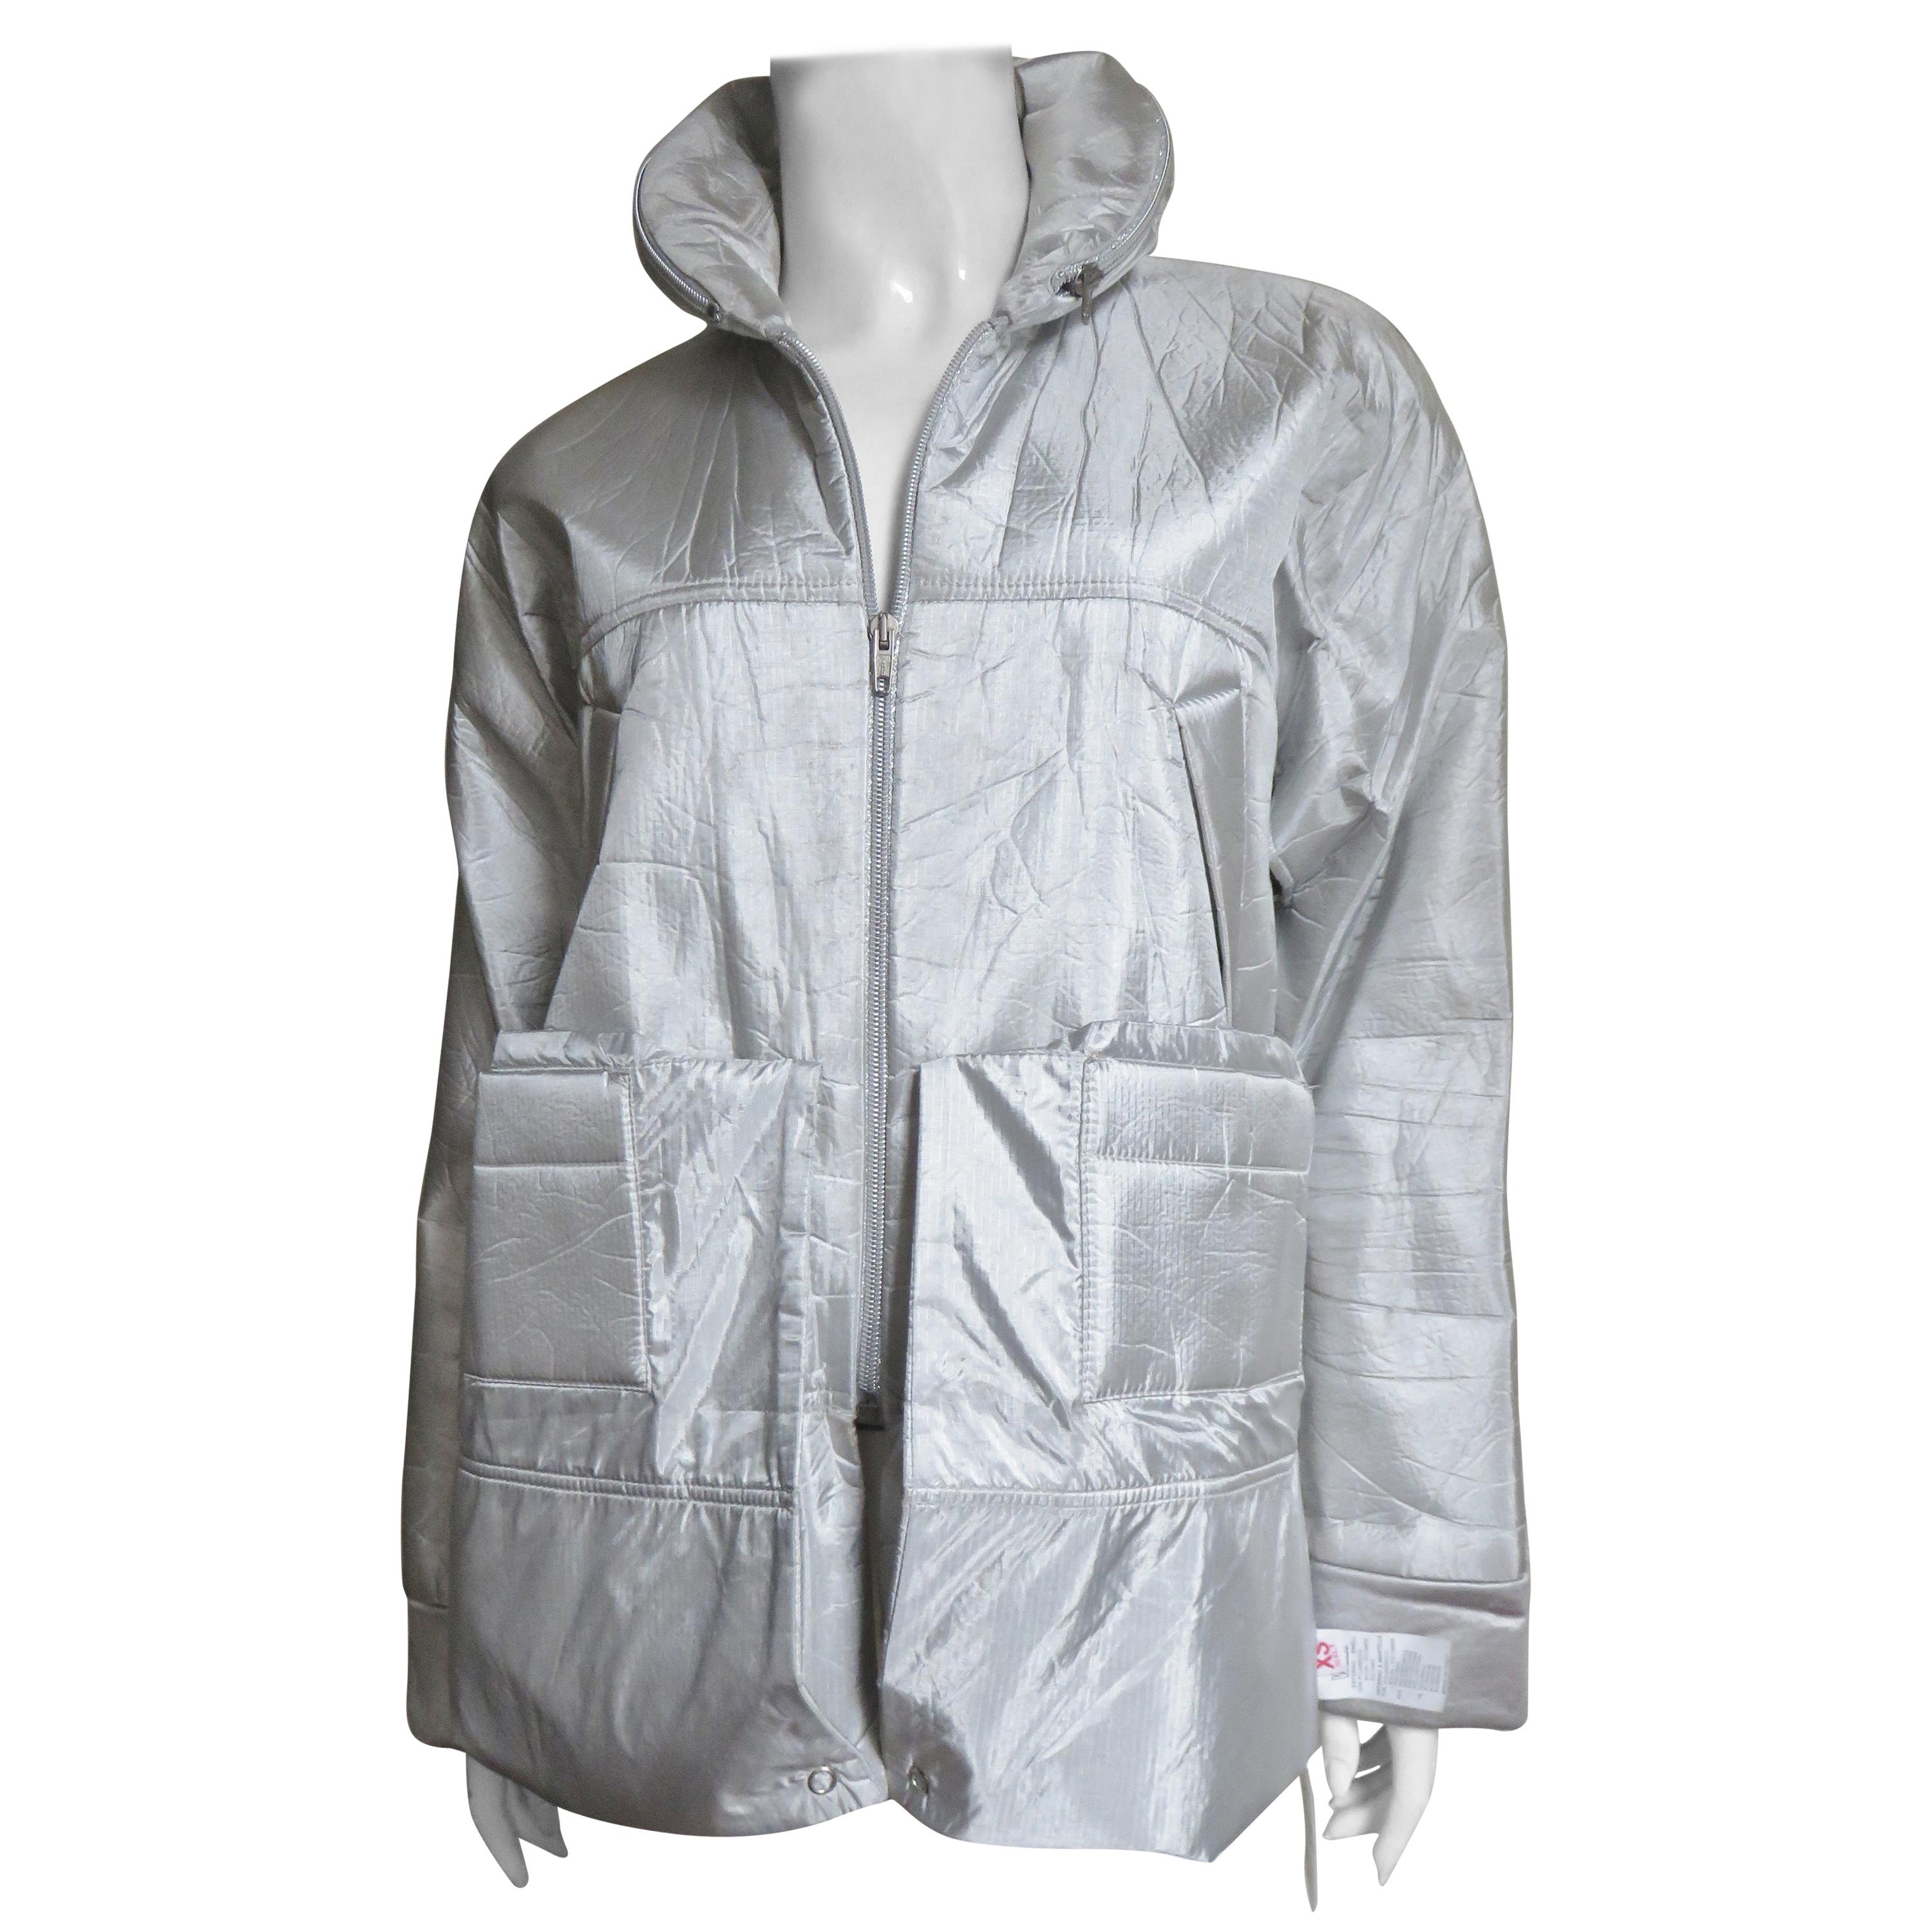 A fabulous convertible silver jacket/coat and hood from Walter Van Beirendonck for Wild and Lethal Trash.  The knee length dolman sleeve jacket has a zipper front and snaps allowing the hem to be folded up to upper thigh length.  It has a rounded